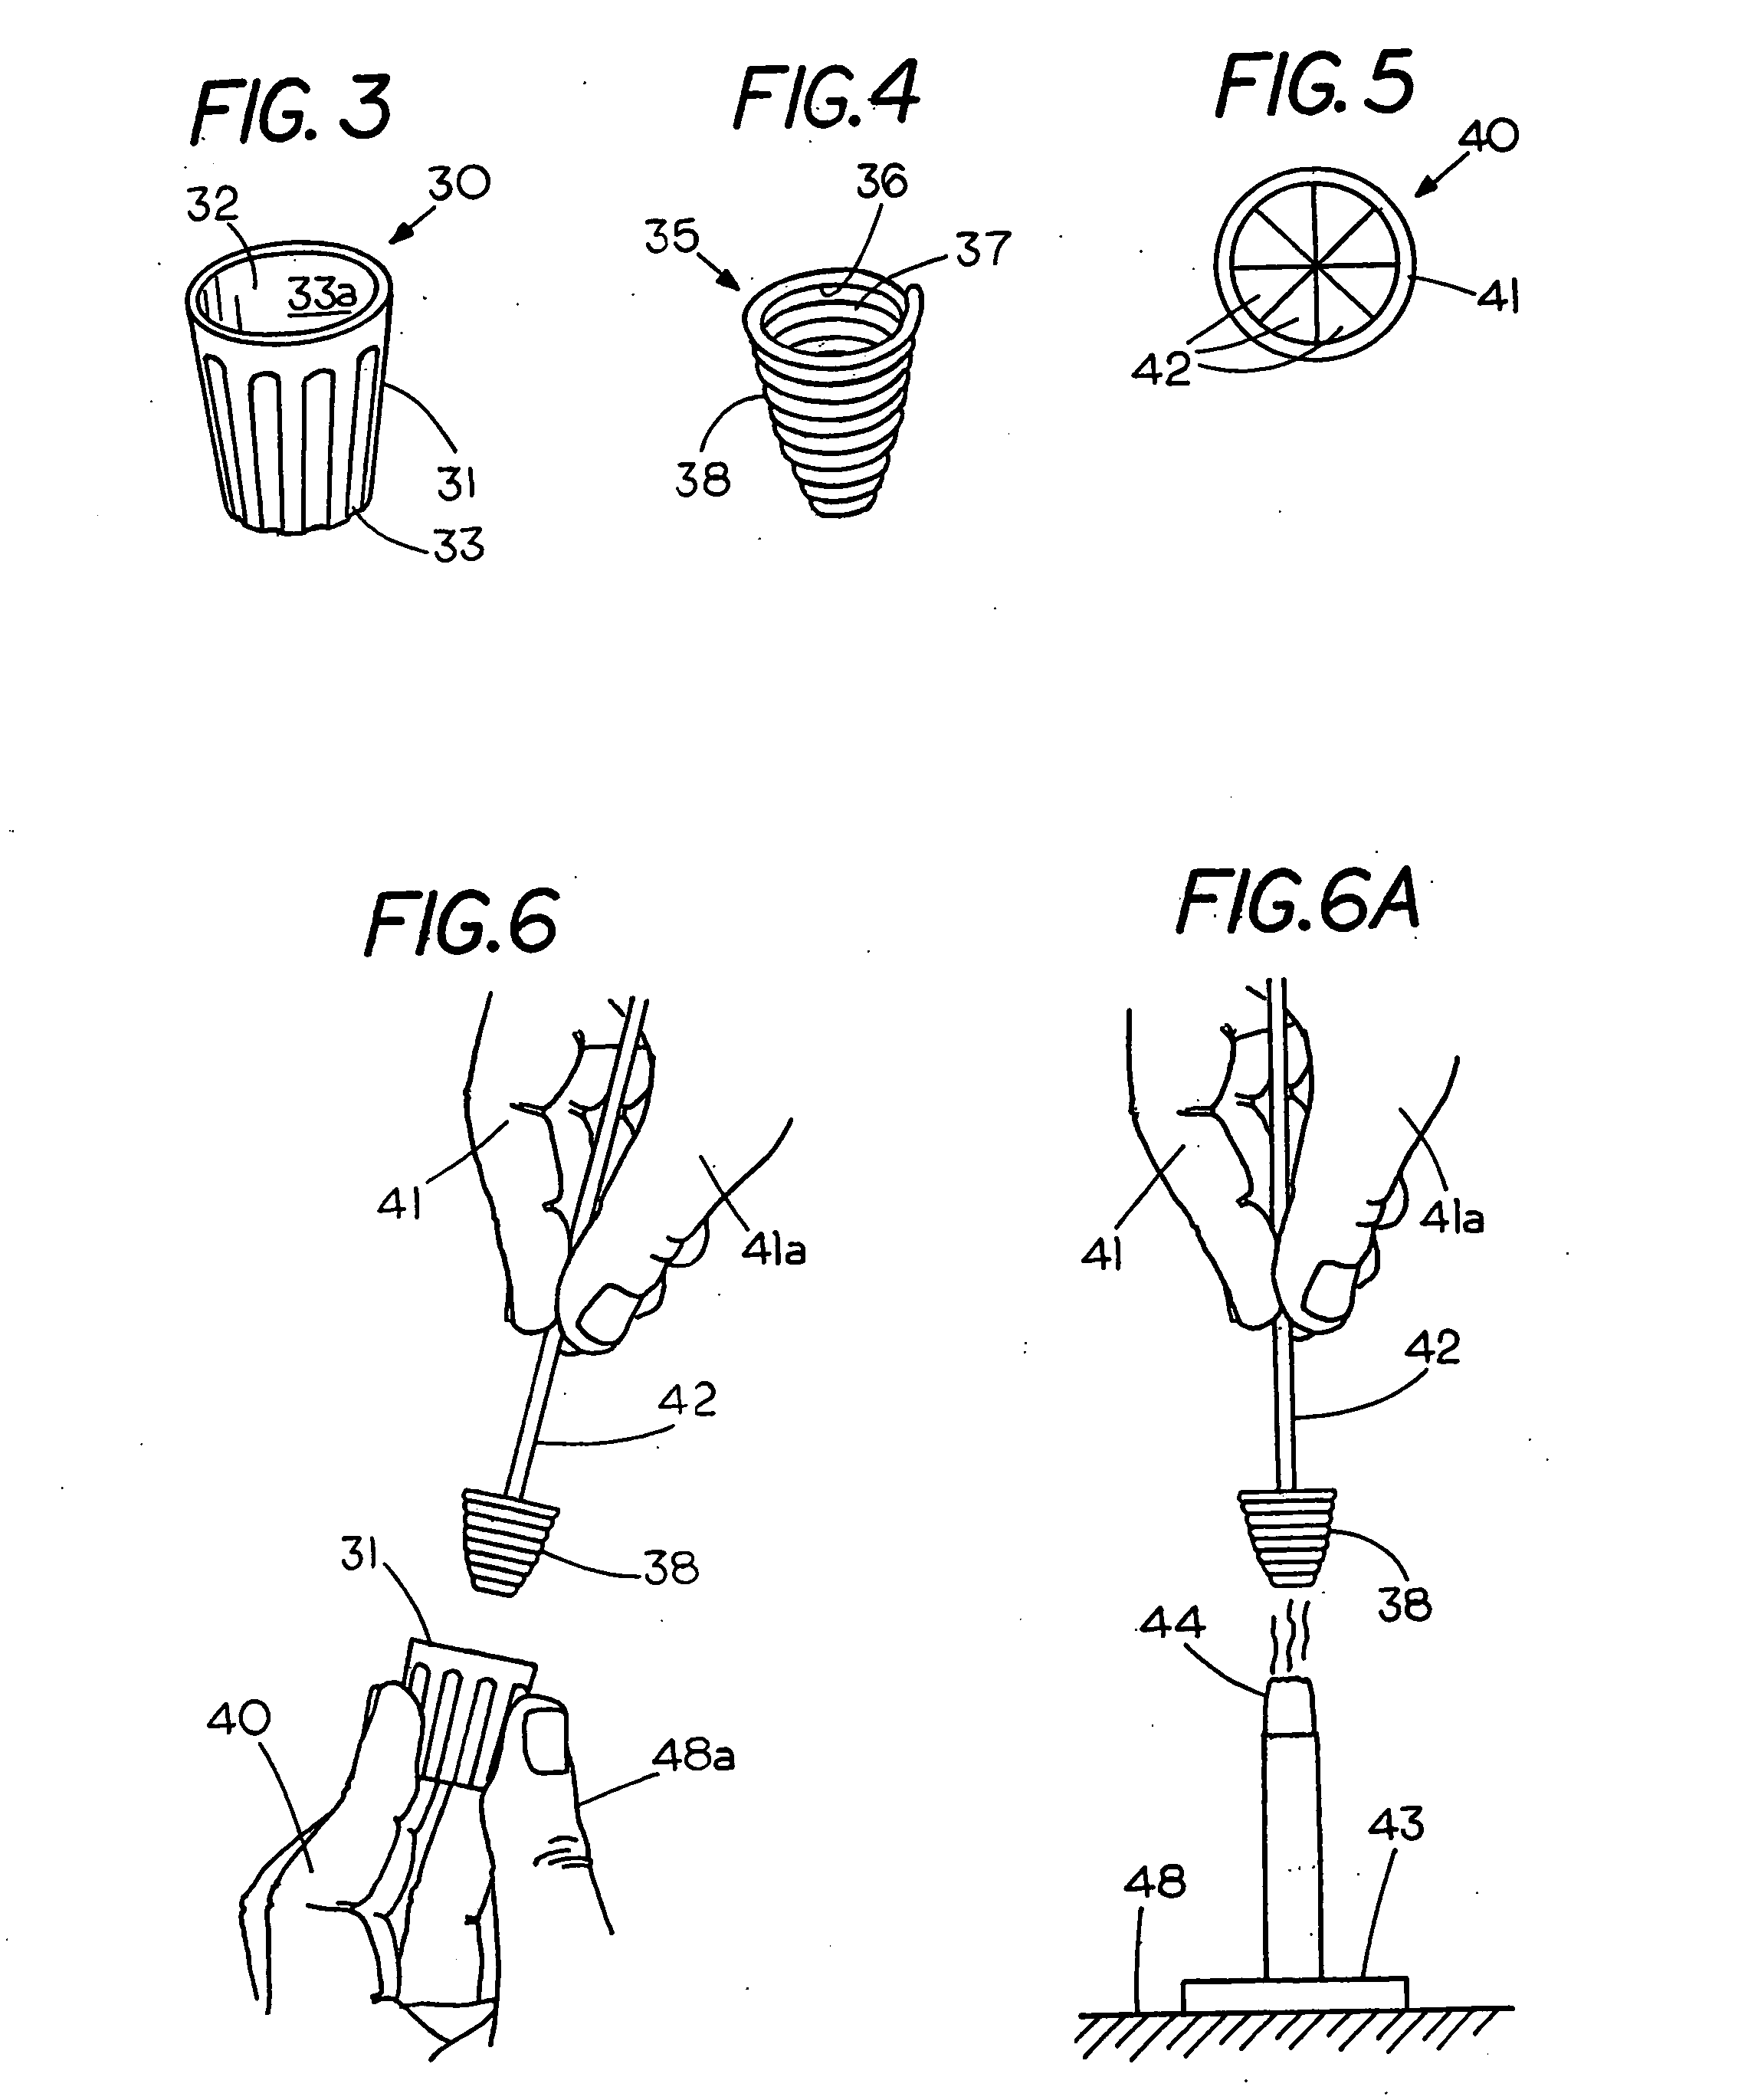 Assembling sealant containing twist-on wire connectors